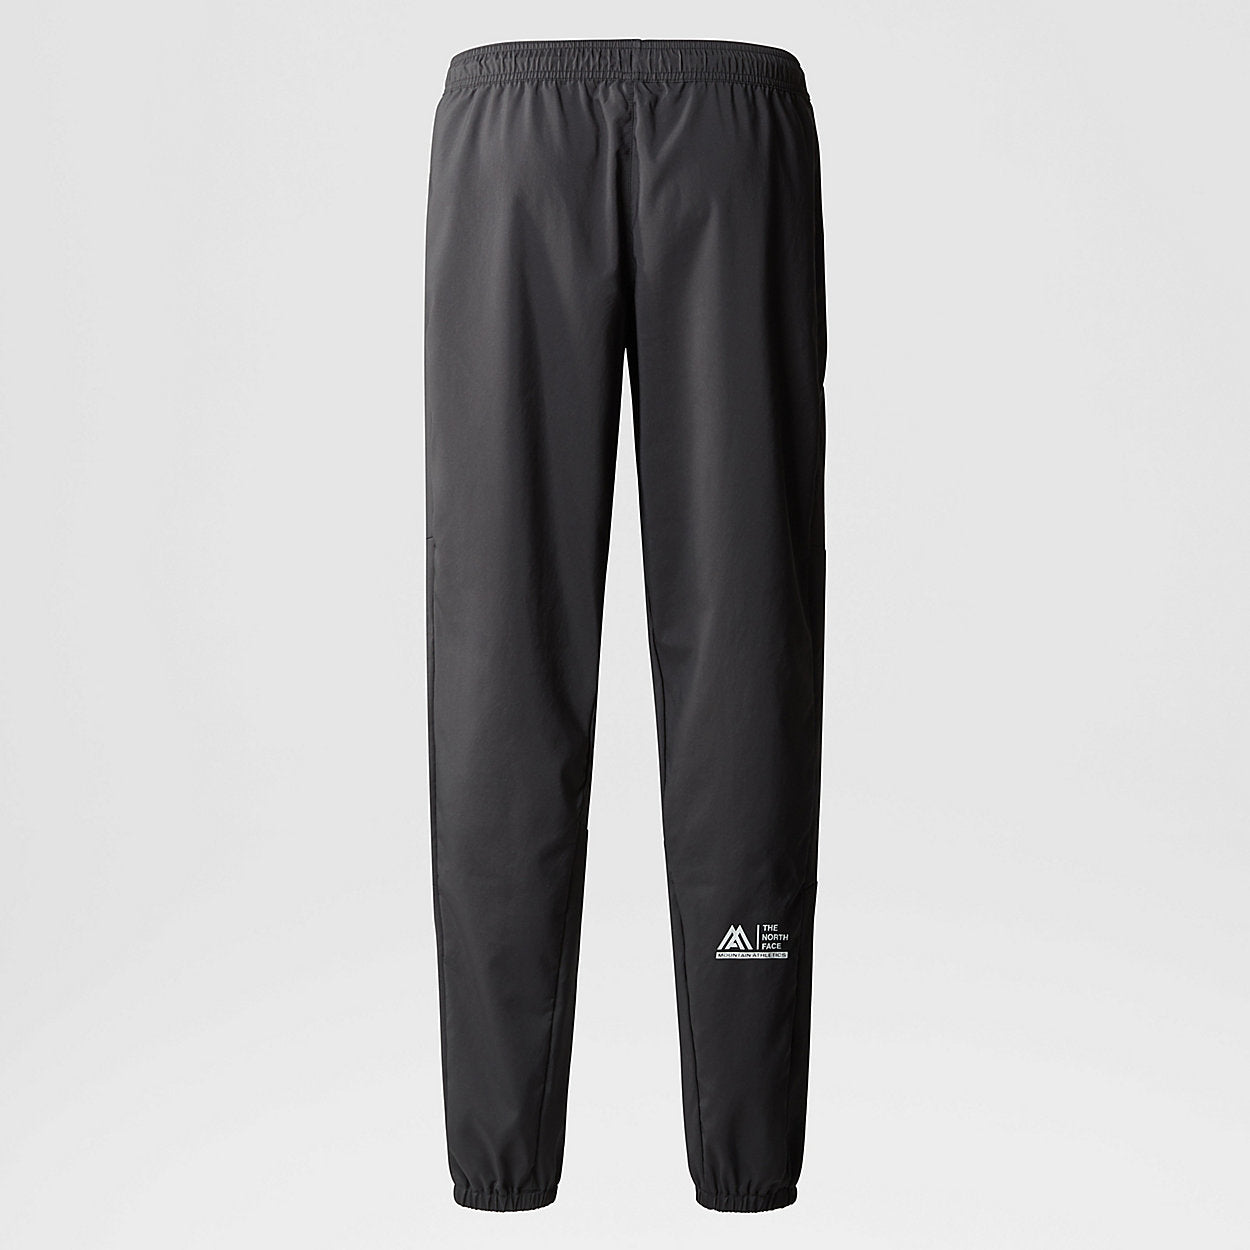 THE NORTH FACE - MOUNTAIN ATHLETIC WIND TRACK PANT